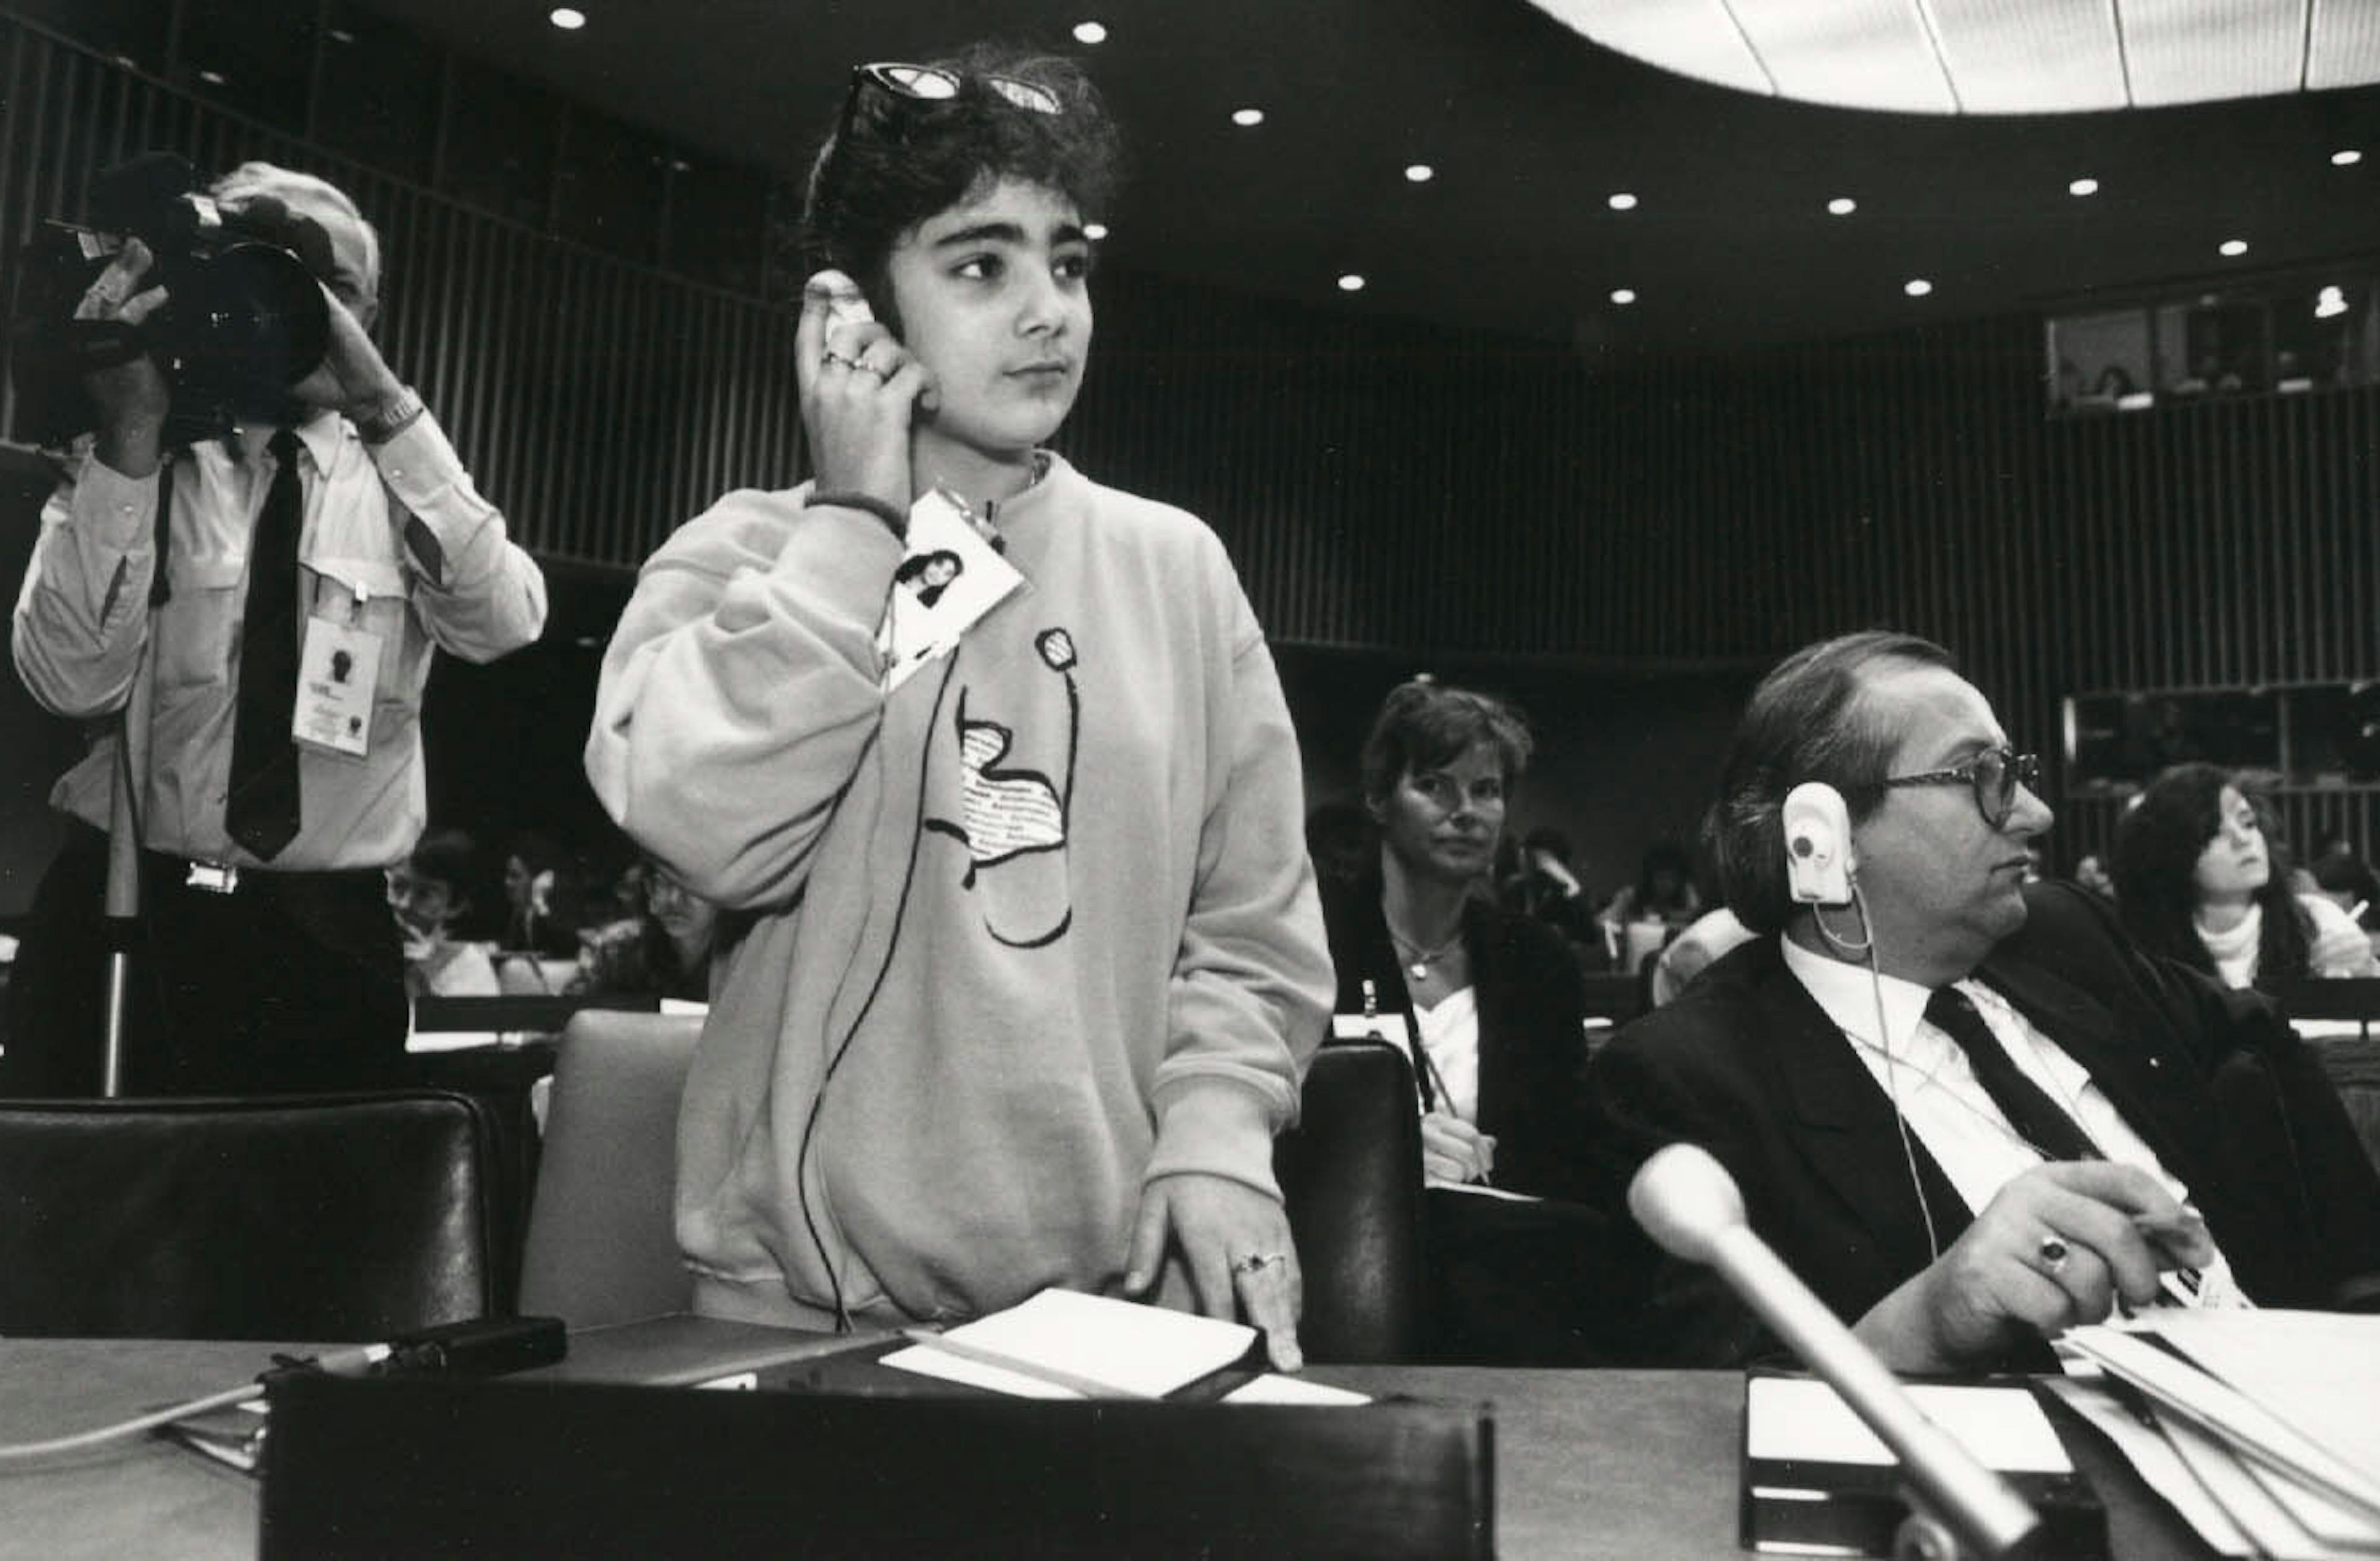 A young journalist attending the Saturday morning press briefing summit, co-chaired by UNICEF executive director James grant and Chilean president Patricio Aylwin. She was one of many young journalists covering the world summit for children.